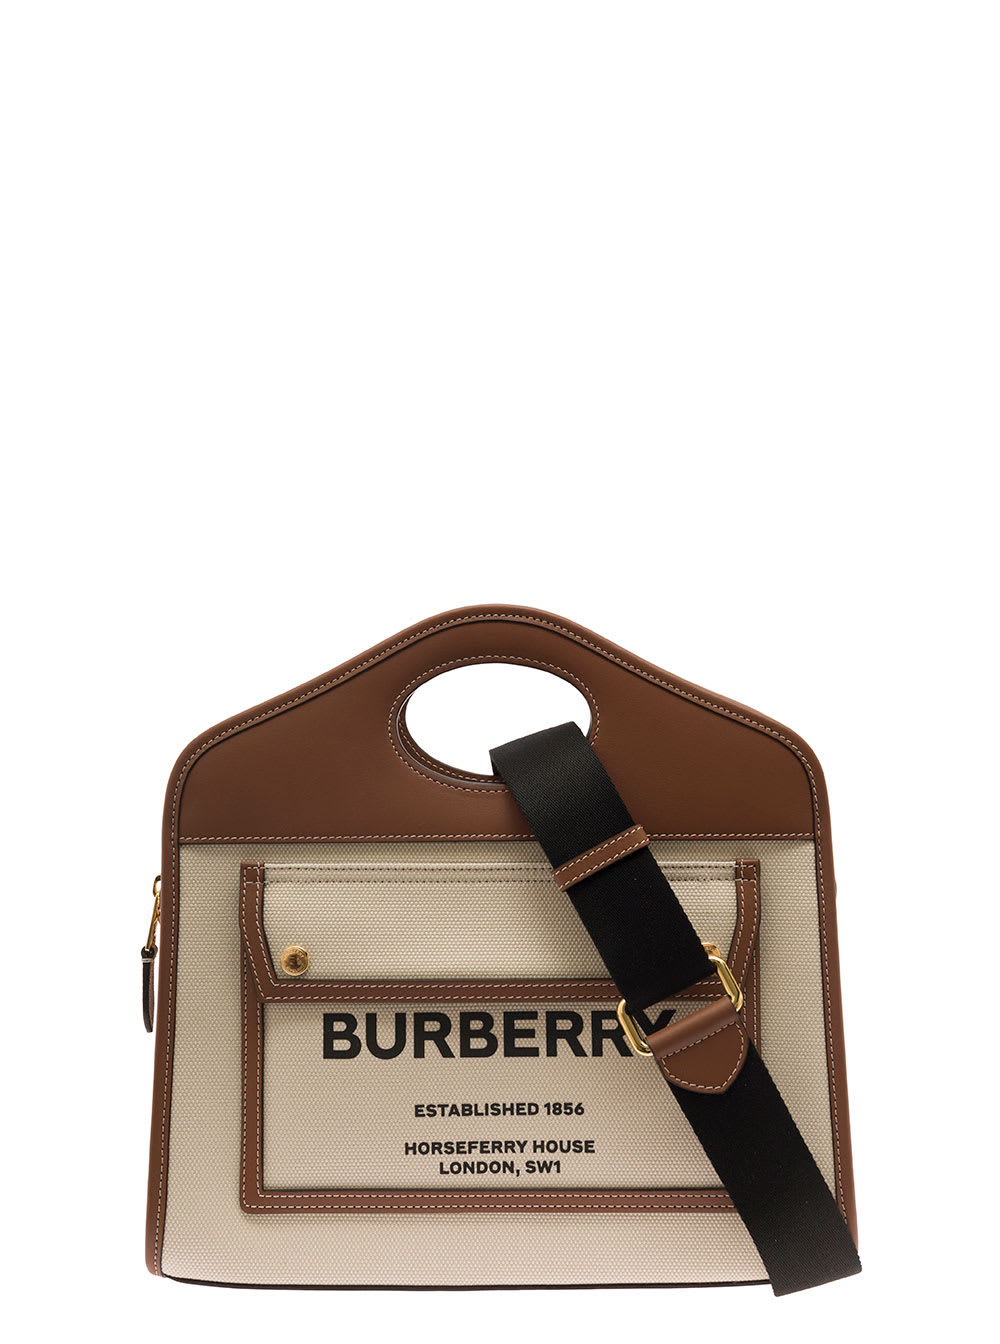 BURBERRY POCKET TWO-TONE SMALL TOTE BAG